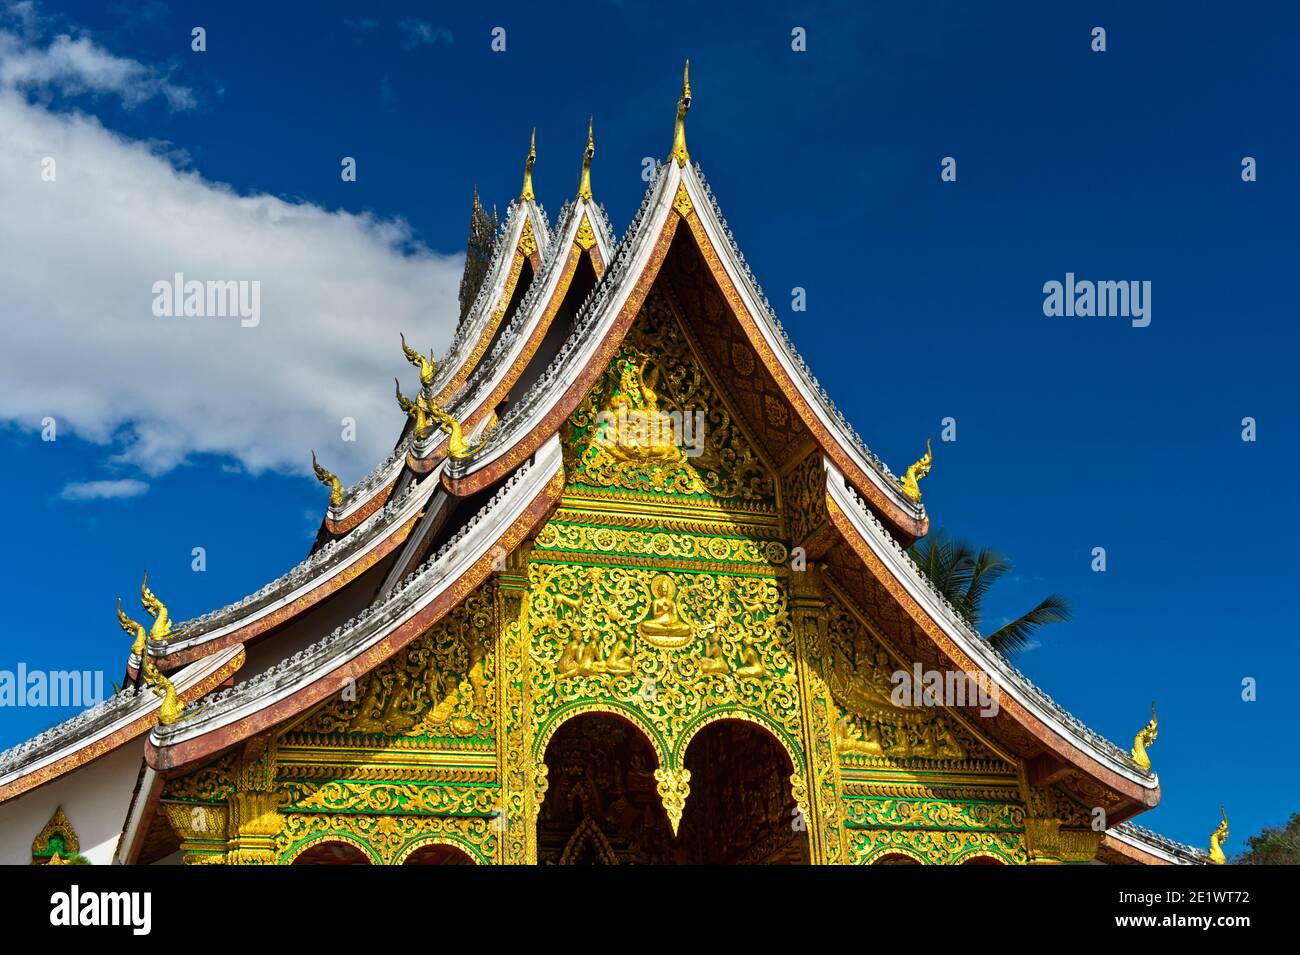 Multi-tiered roof in Thai style adorned with stylized Naga finials at the ends of the roof, Haw Pha Bang temple,  Luang Prabang, Laos Stock Photo